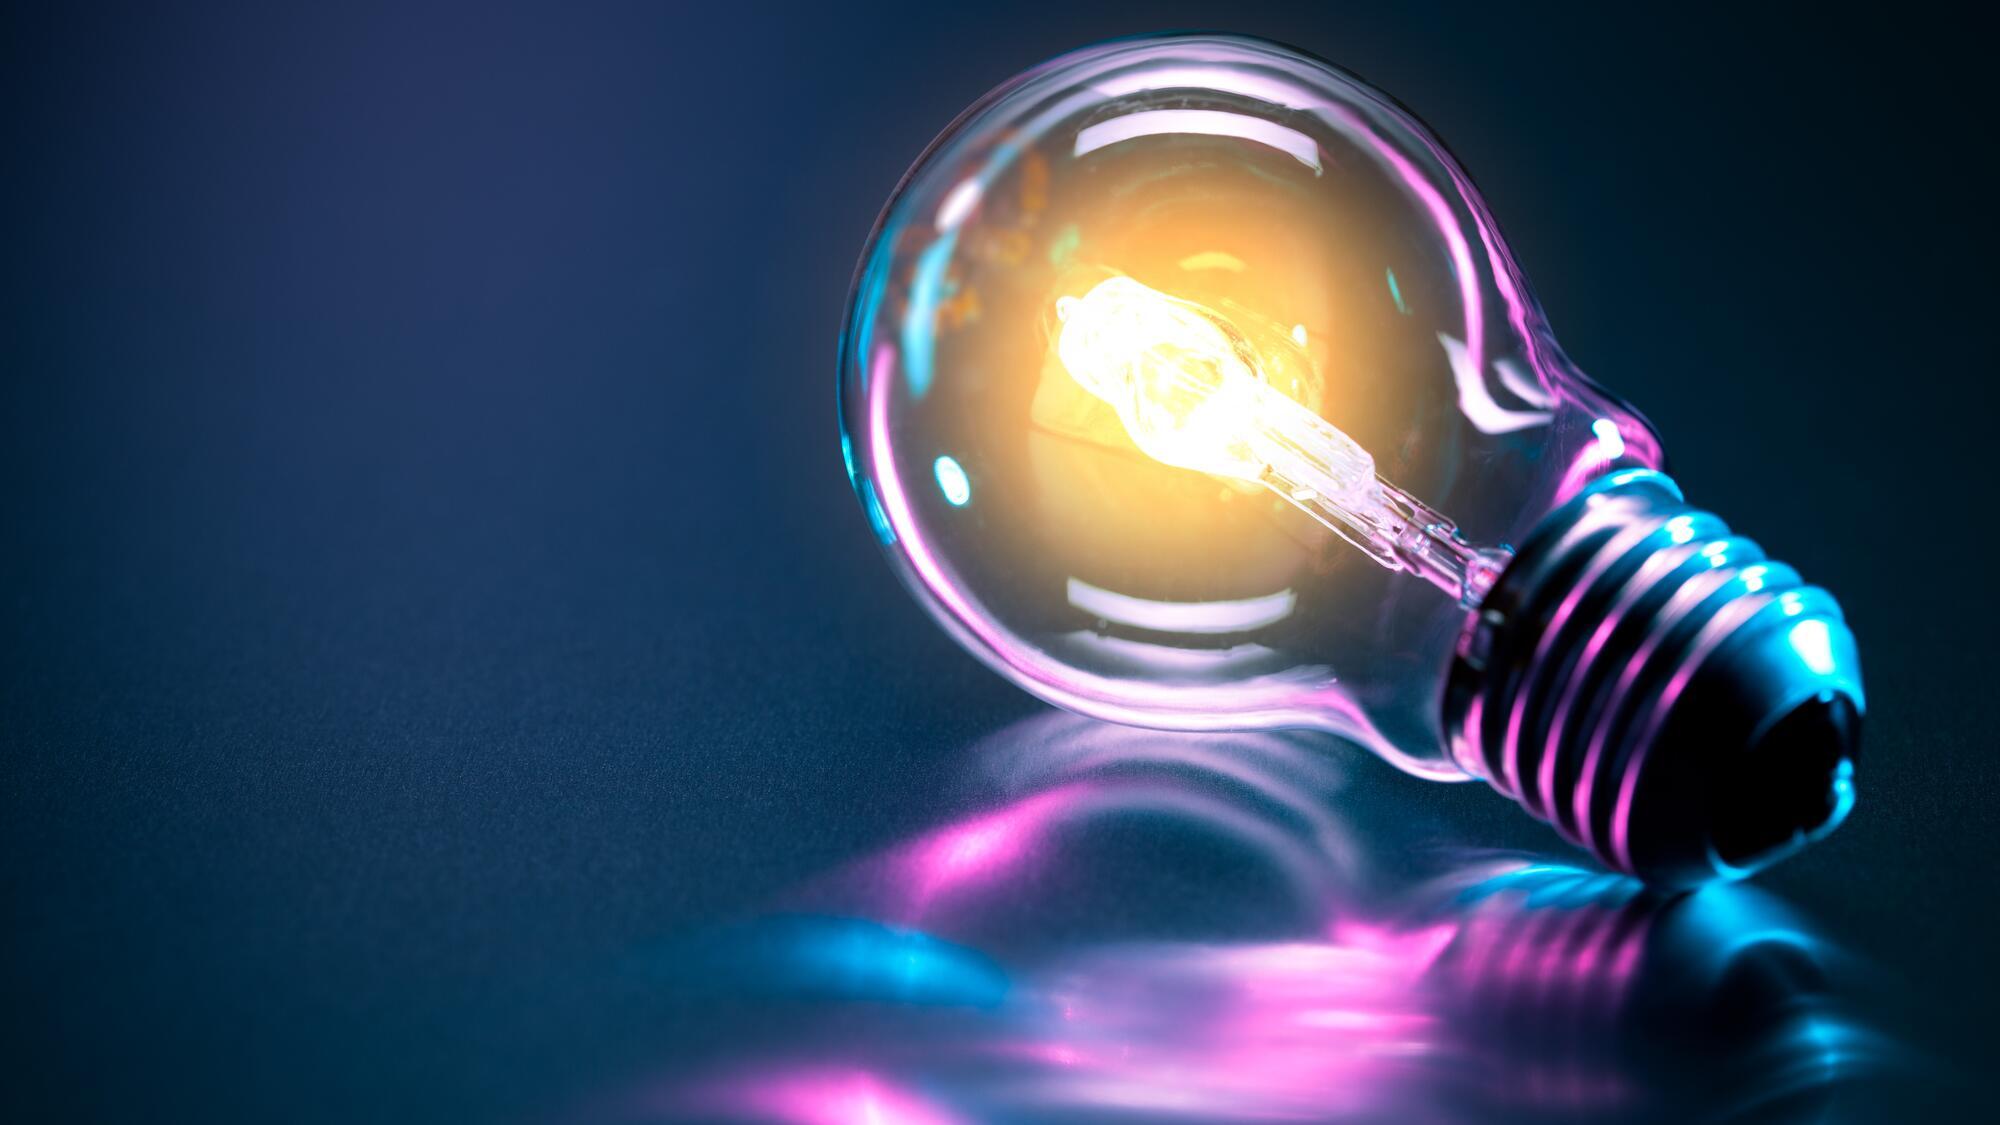 A lit up lightbulb lays on a reflective surface, casting a purple-tinted reflection